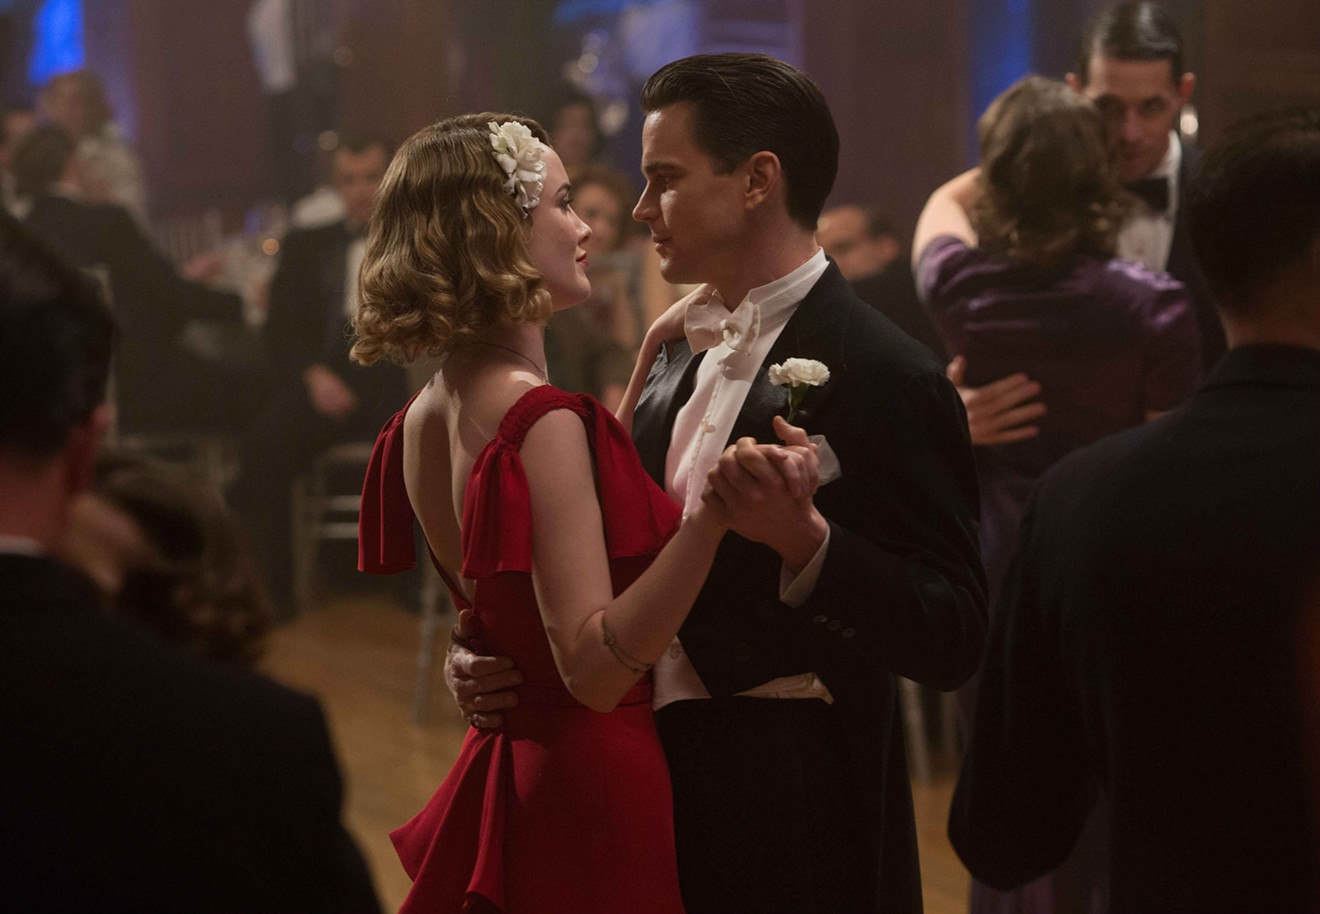 Matt Bomer (right) has a chance to be a "Stahr" in The Last Tycoon but finds himself in a featureless romance with waitress Kathleen (Dominique McElligott).